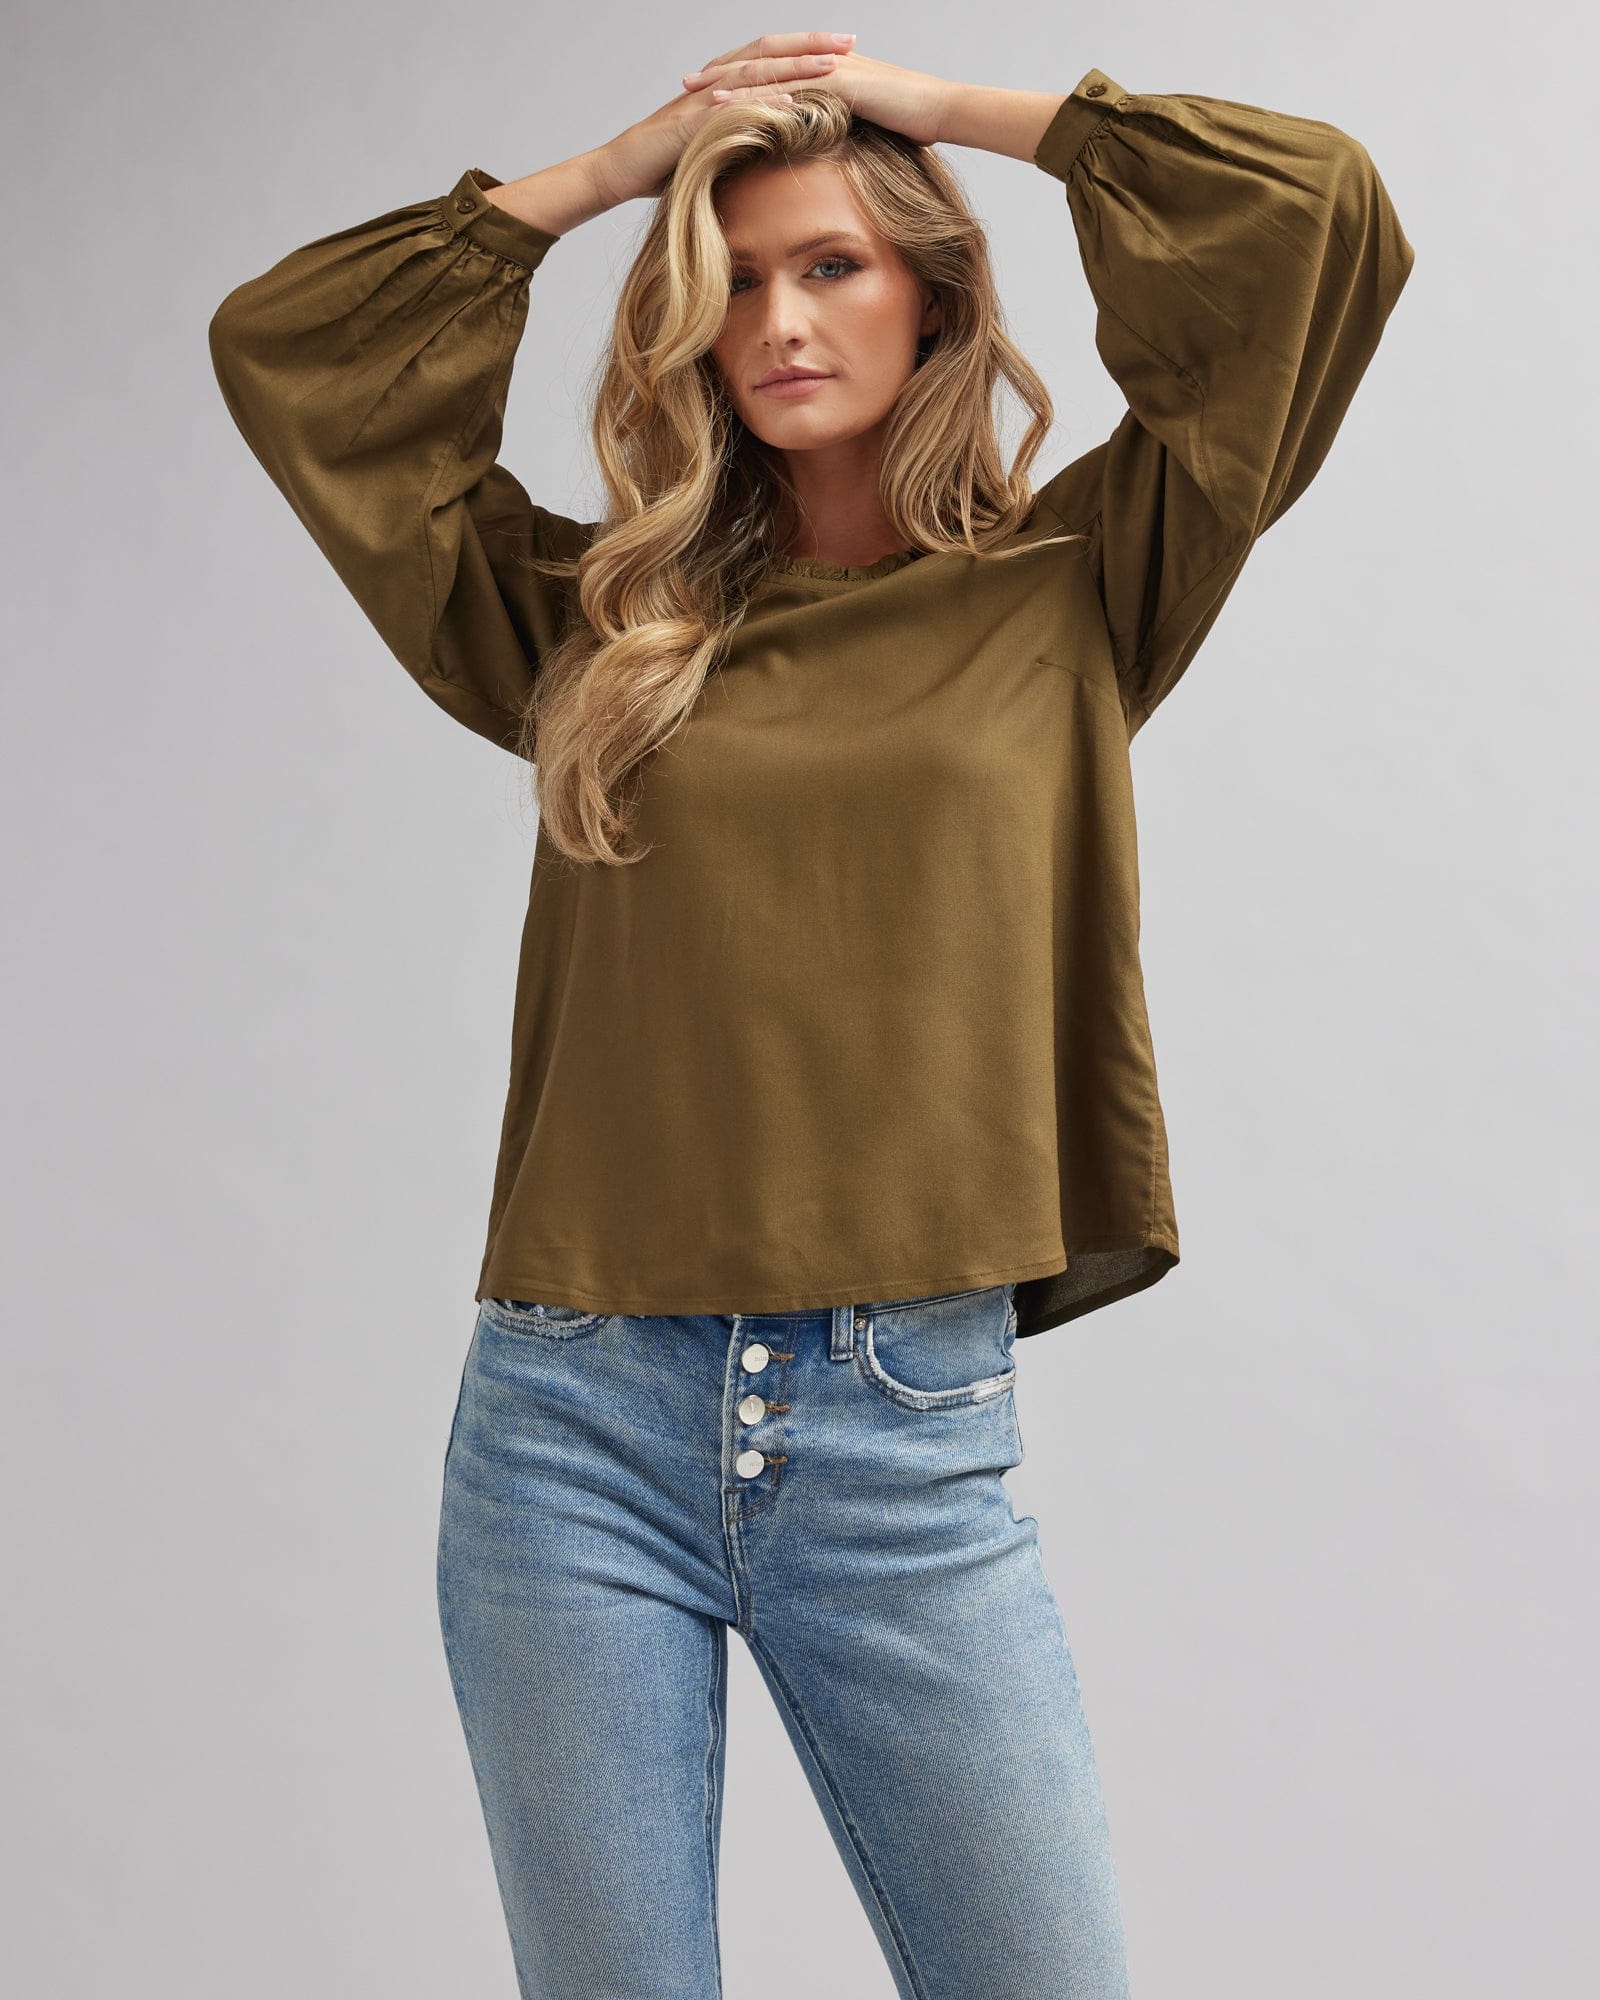 Woman in an olive green, ong sleeve blouse